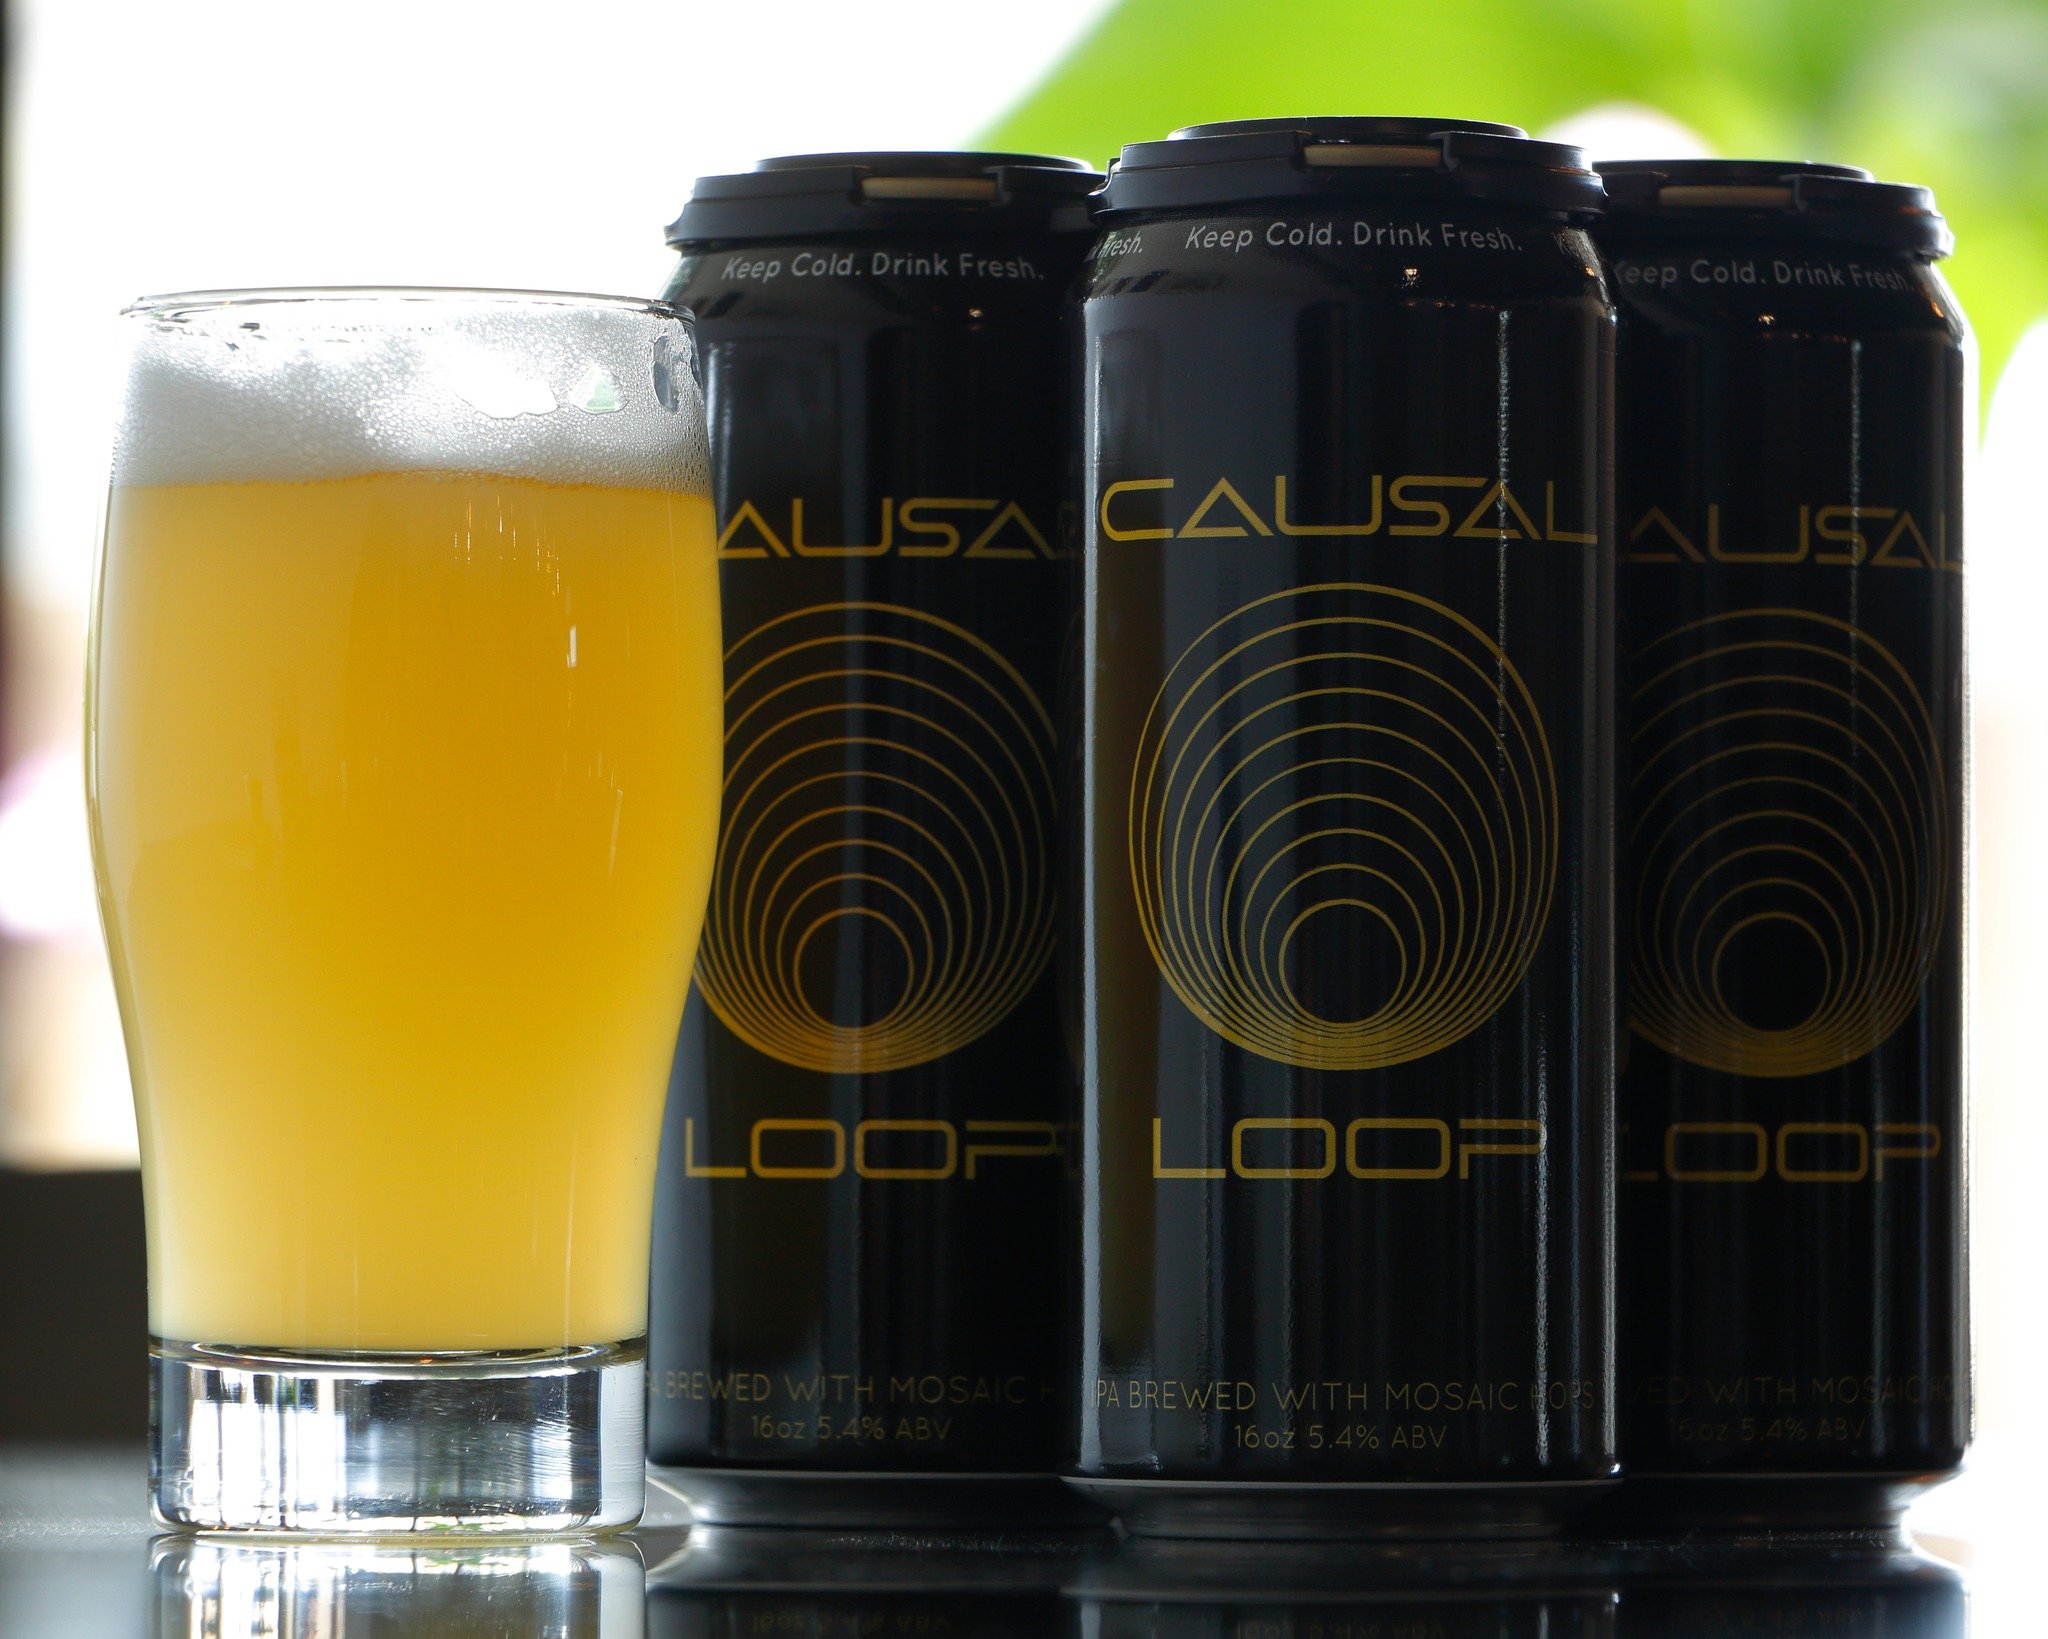 Causal is back on tap and canned up with some new packaging just waiting to go home with you!